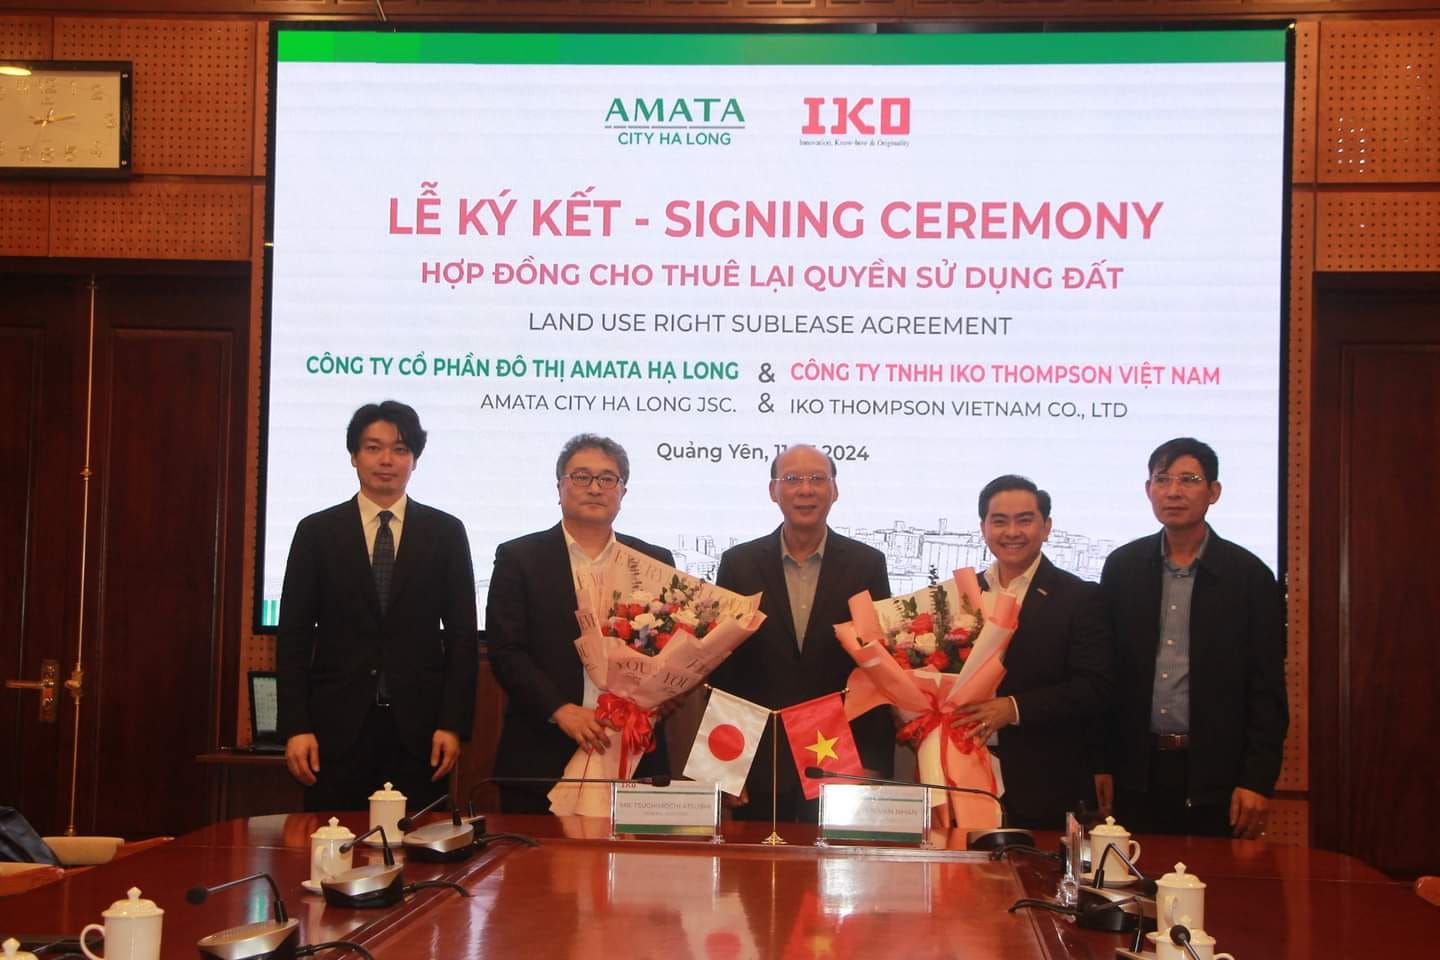 Amata City Ha Long and IKO Thompson Vietnam sign a land lease agreement in Quang Ninh province, northern Vietnam, March 11, 2024. Photo courtesy of Quang Ninh newspaper.